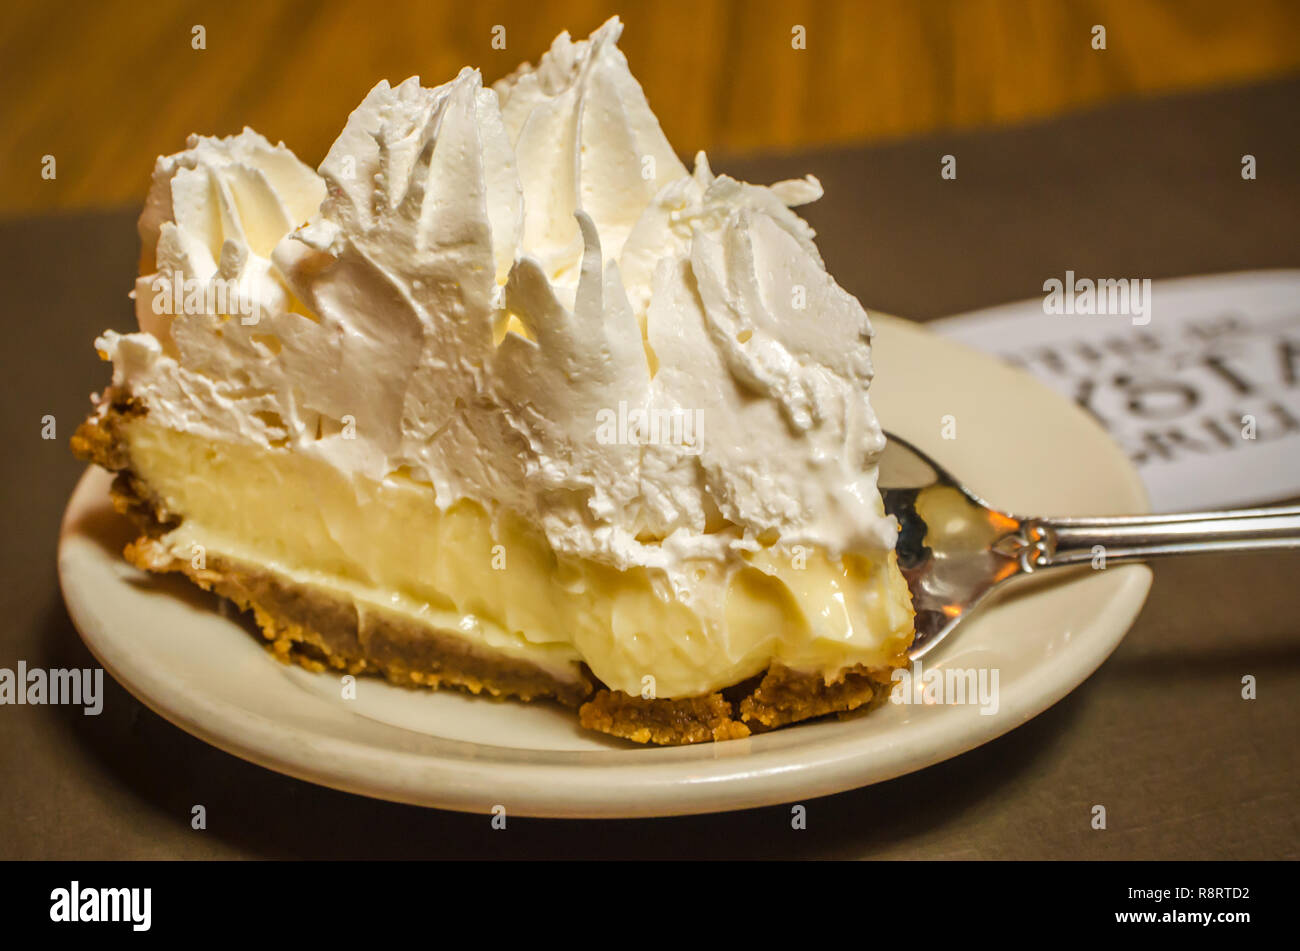 Lemon icebox pie is one of the specialties at Crystal Grill in Greenwood, Mississippi. Stock Photo